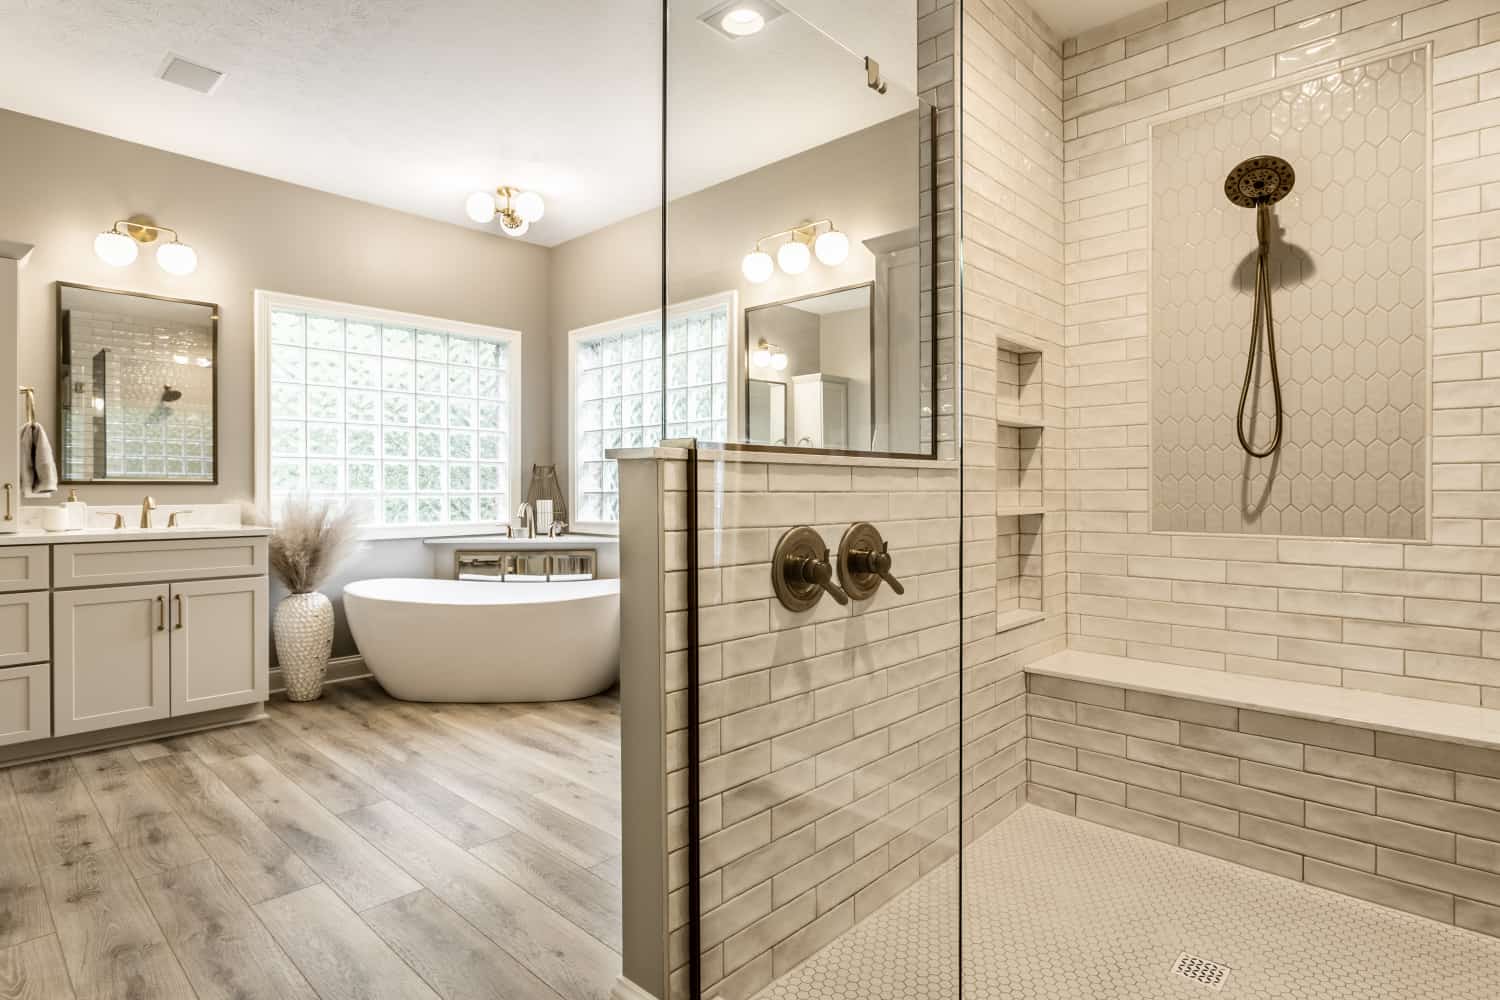 Nicholas Design Build | A modern white bathroom with a walk-in shower featuring brushed gold accents.